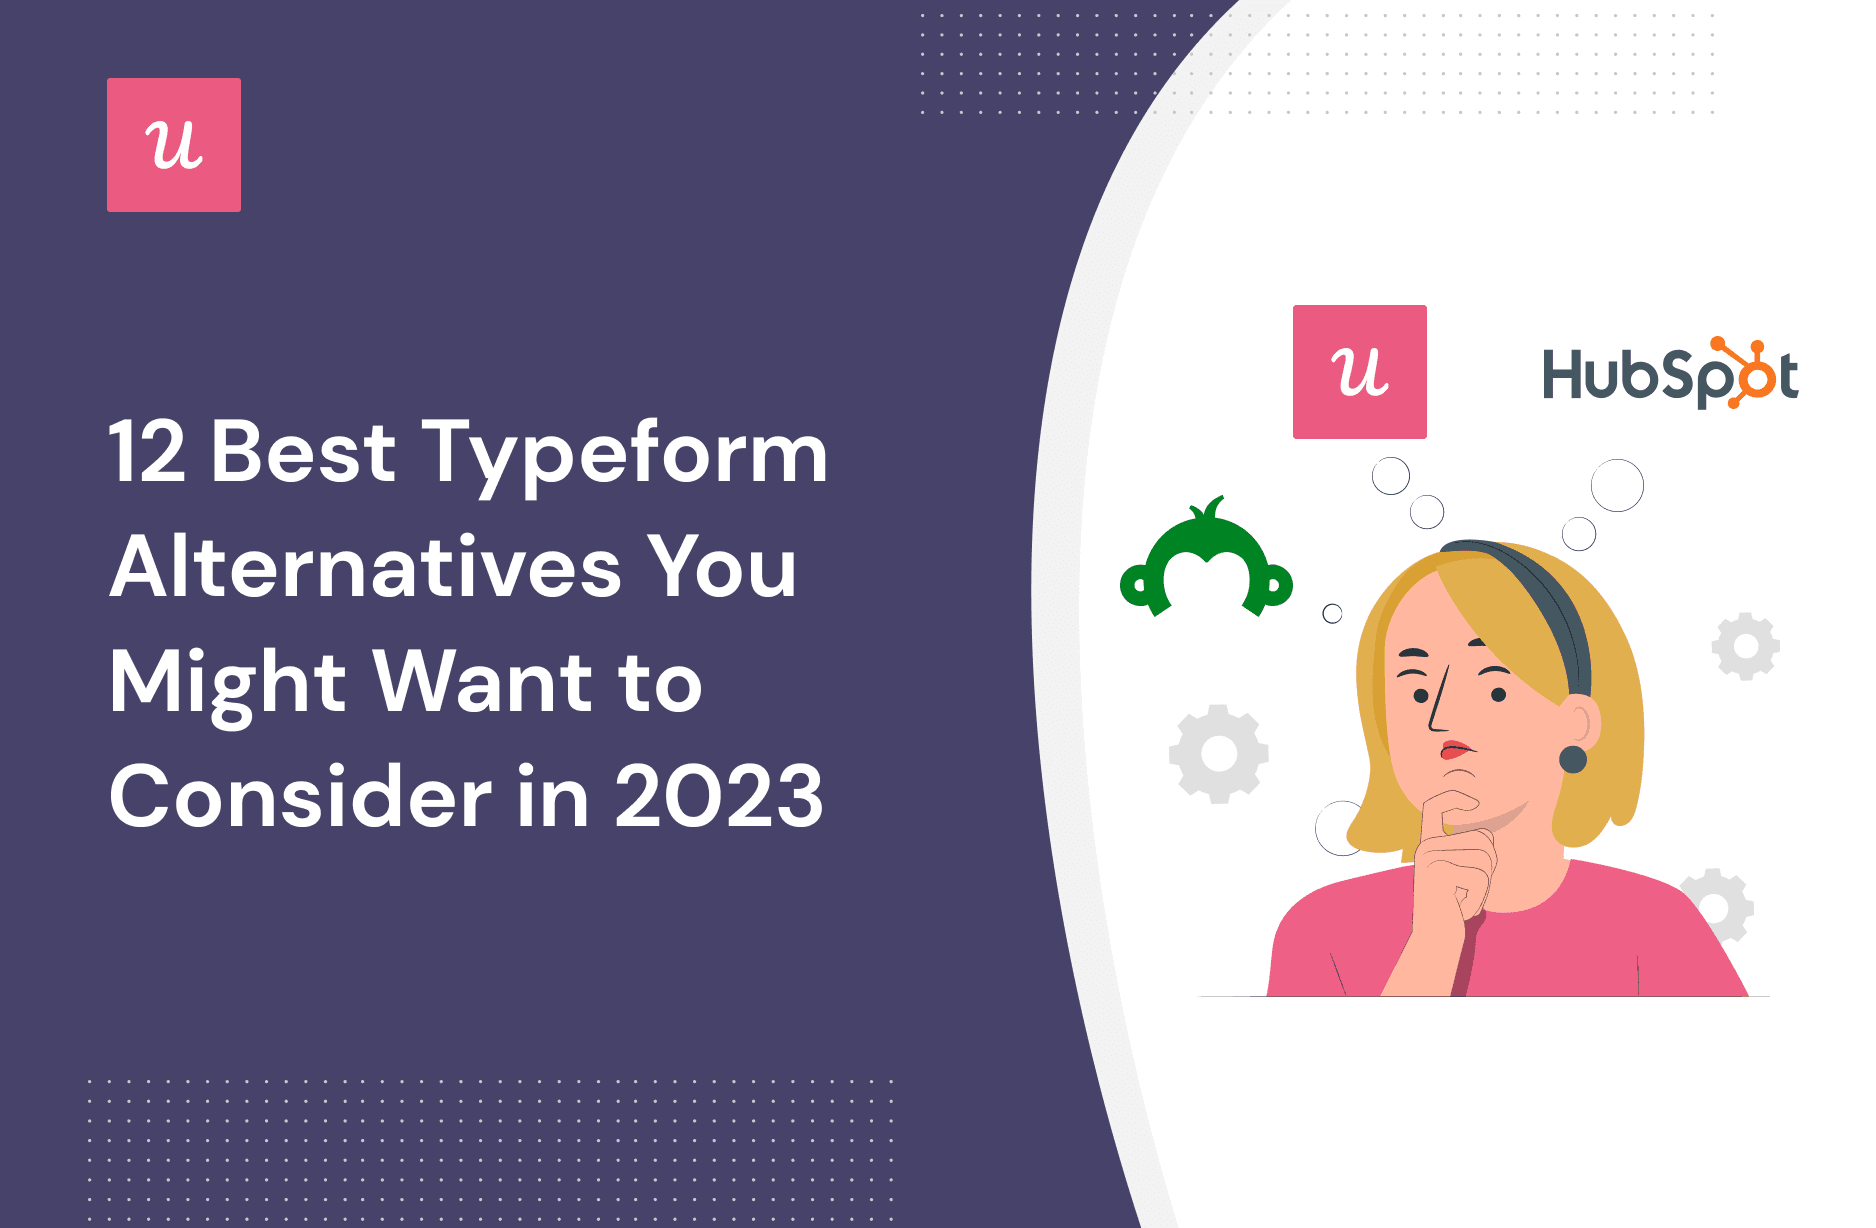 12 Best Typeform Alternatives You Might Want to Consider in 2023 cover